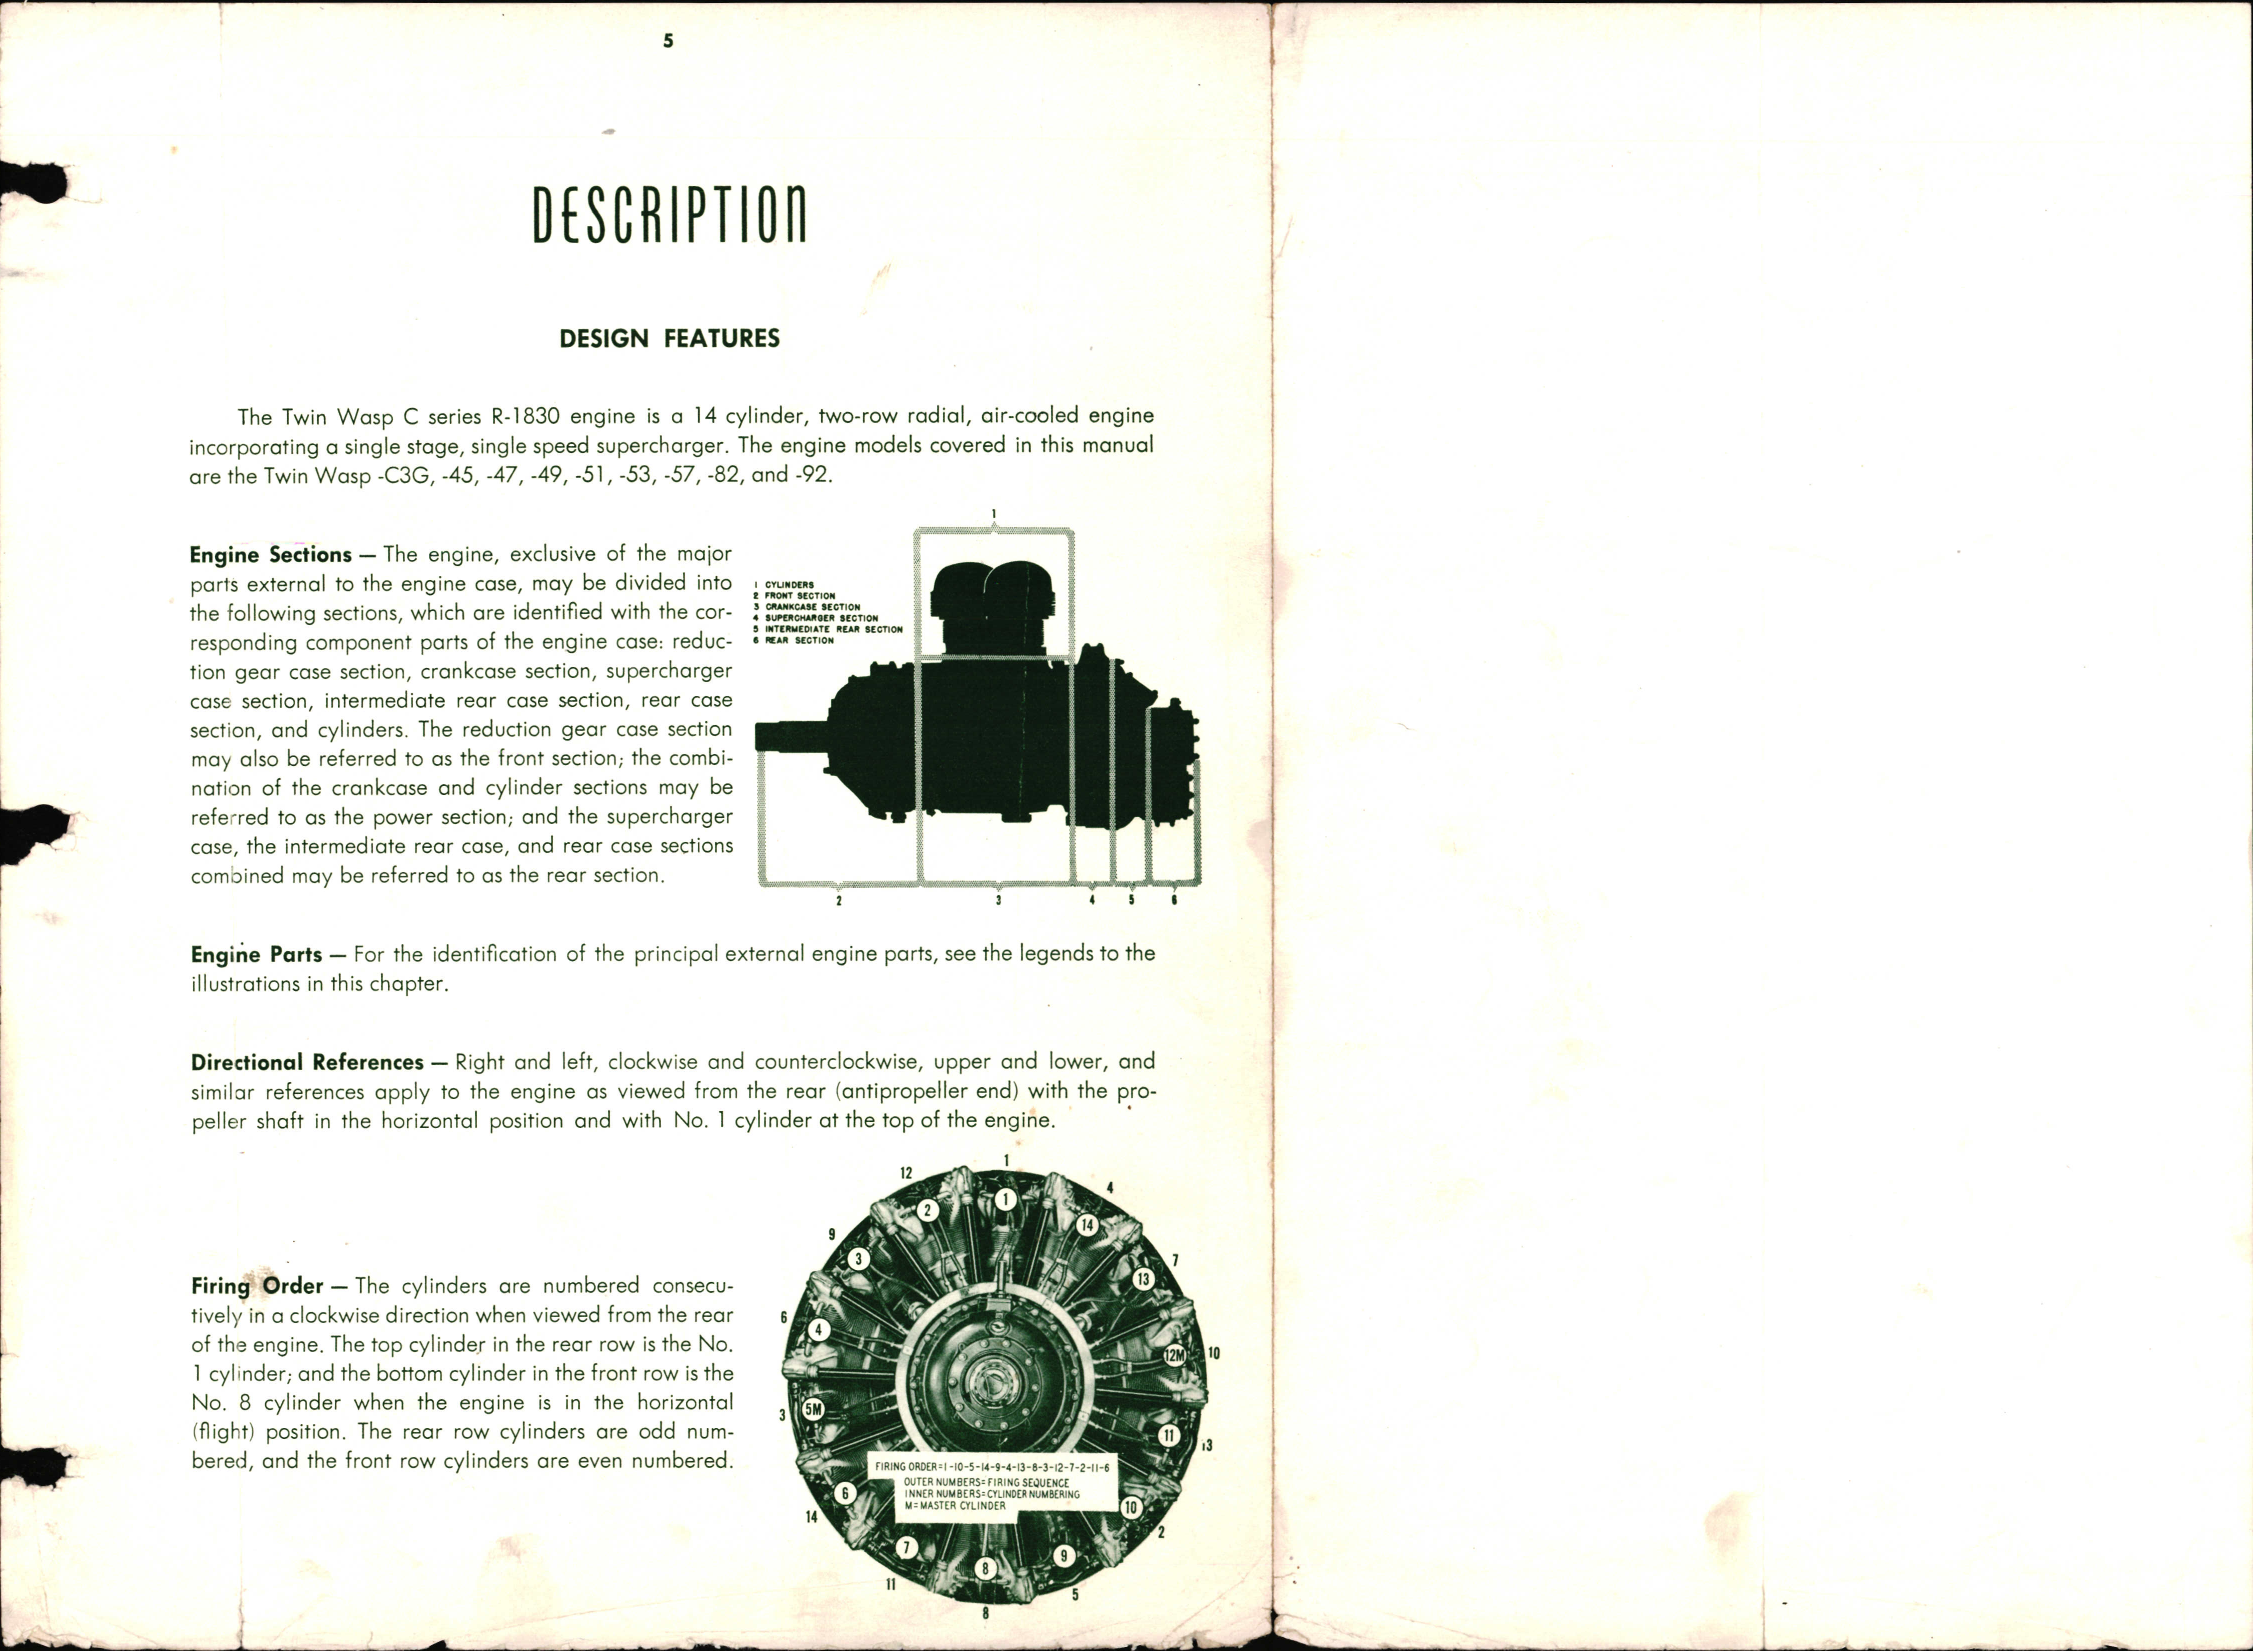 Sample page 7 from AirCorps Library document: Overhaul Manual for Twin Wasp R-1830 C Series Engines